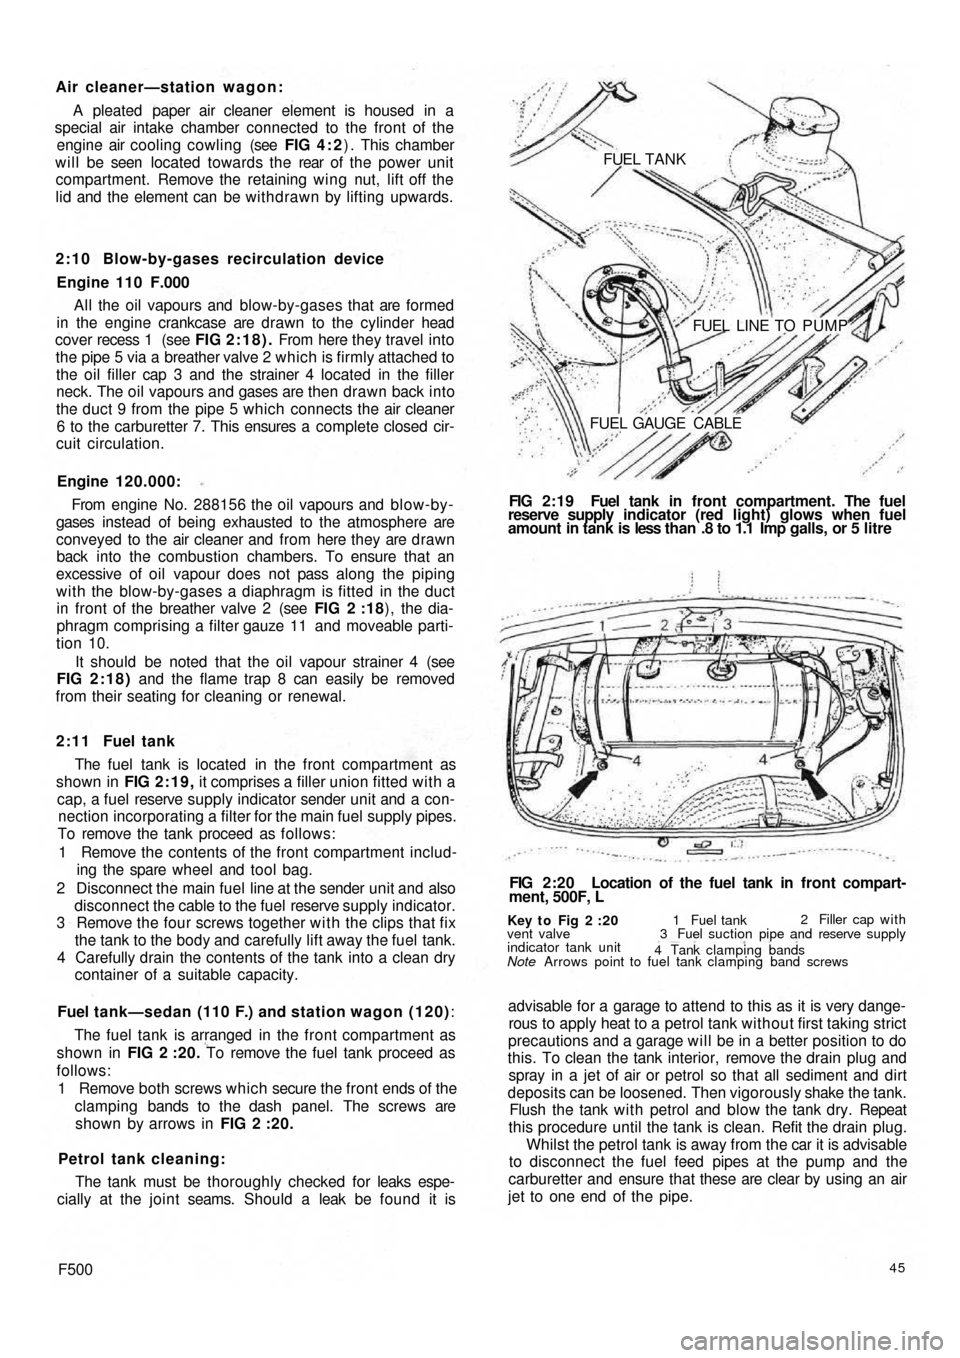 FIAT 500 1960 1.G Workshop Manual Air cleaner—station wagon:
A pleated paper air cleaner element is housed  in a
special air intake chamber connected to the front of the
engine air cooling cowling (see FIG 4 : 2) . This chamber
will